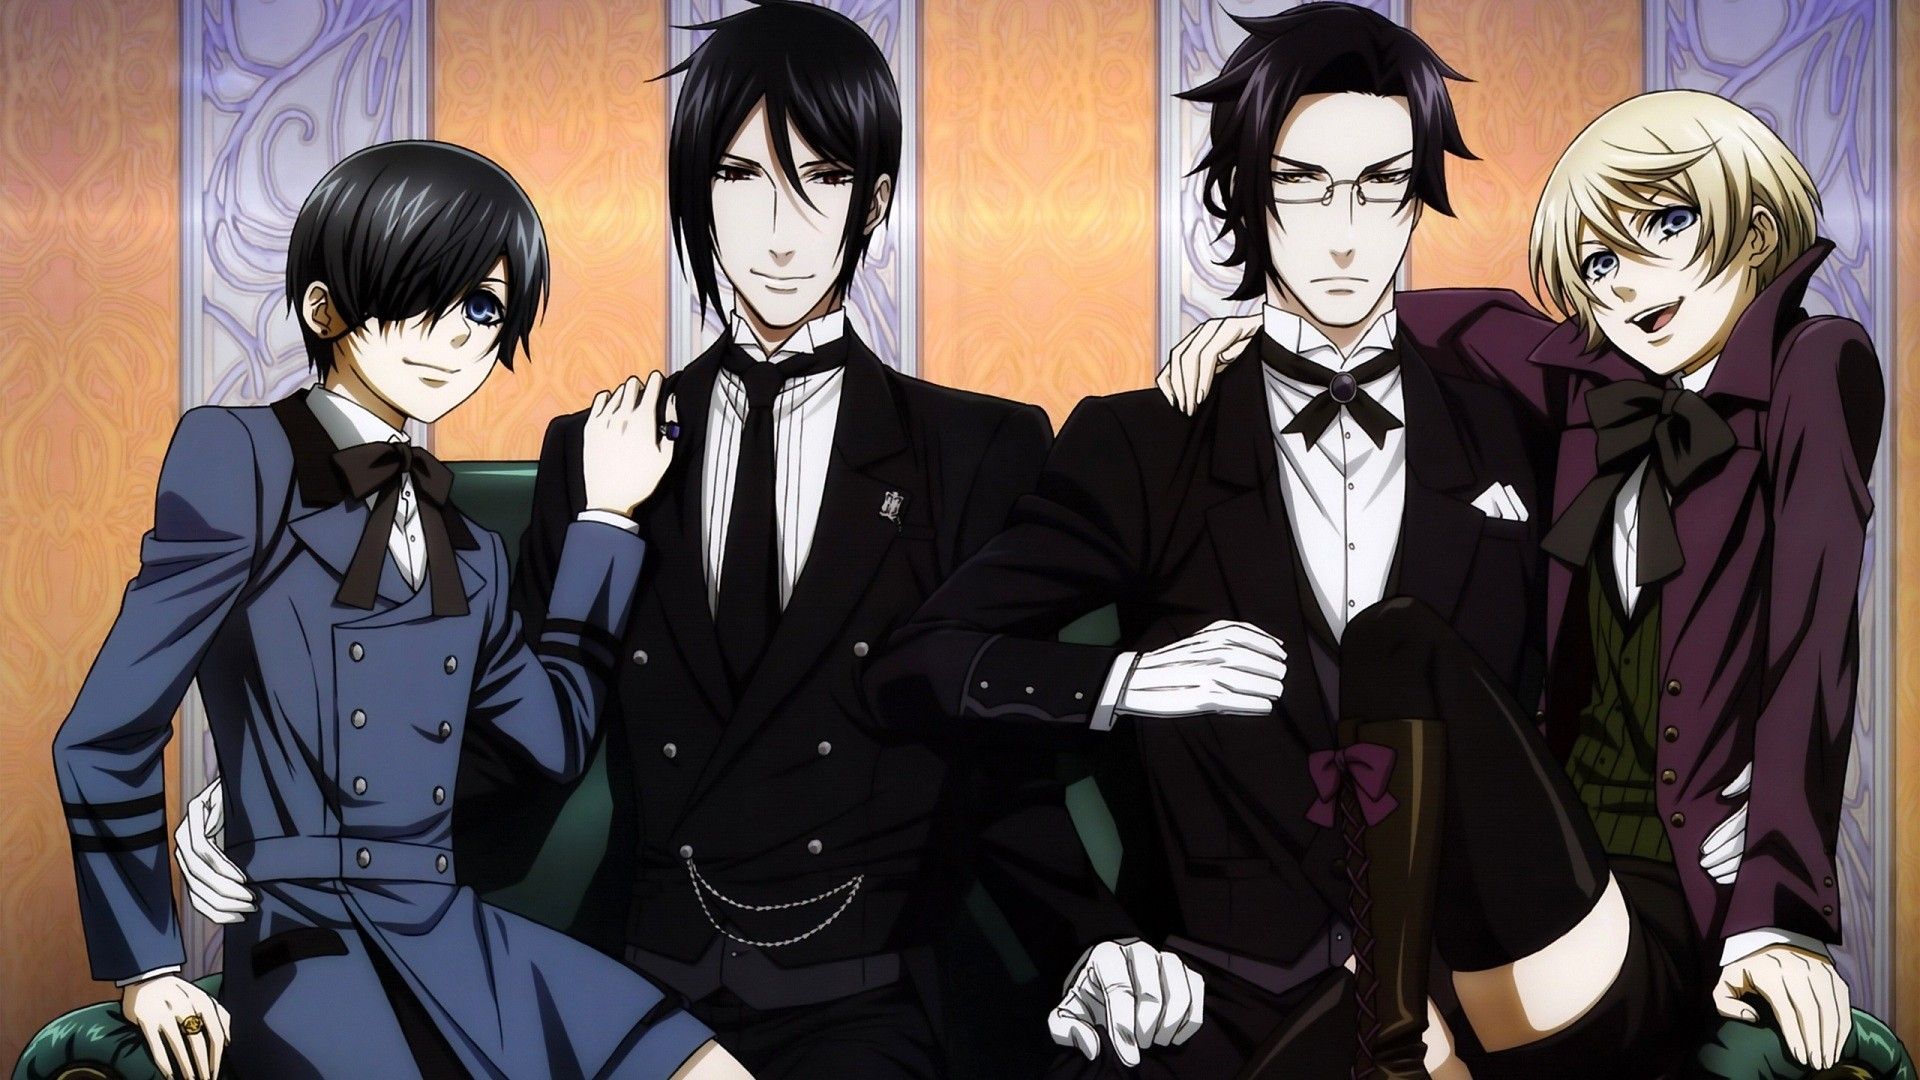 Black Butler: The 10 Most Powerful Villains, Ranked